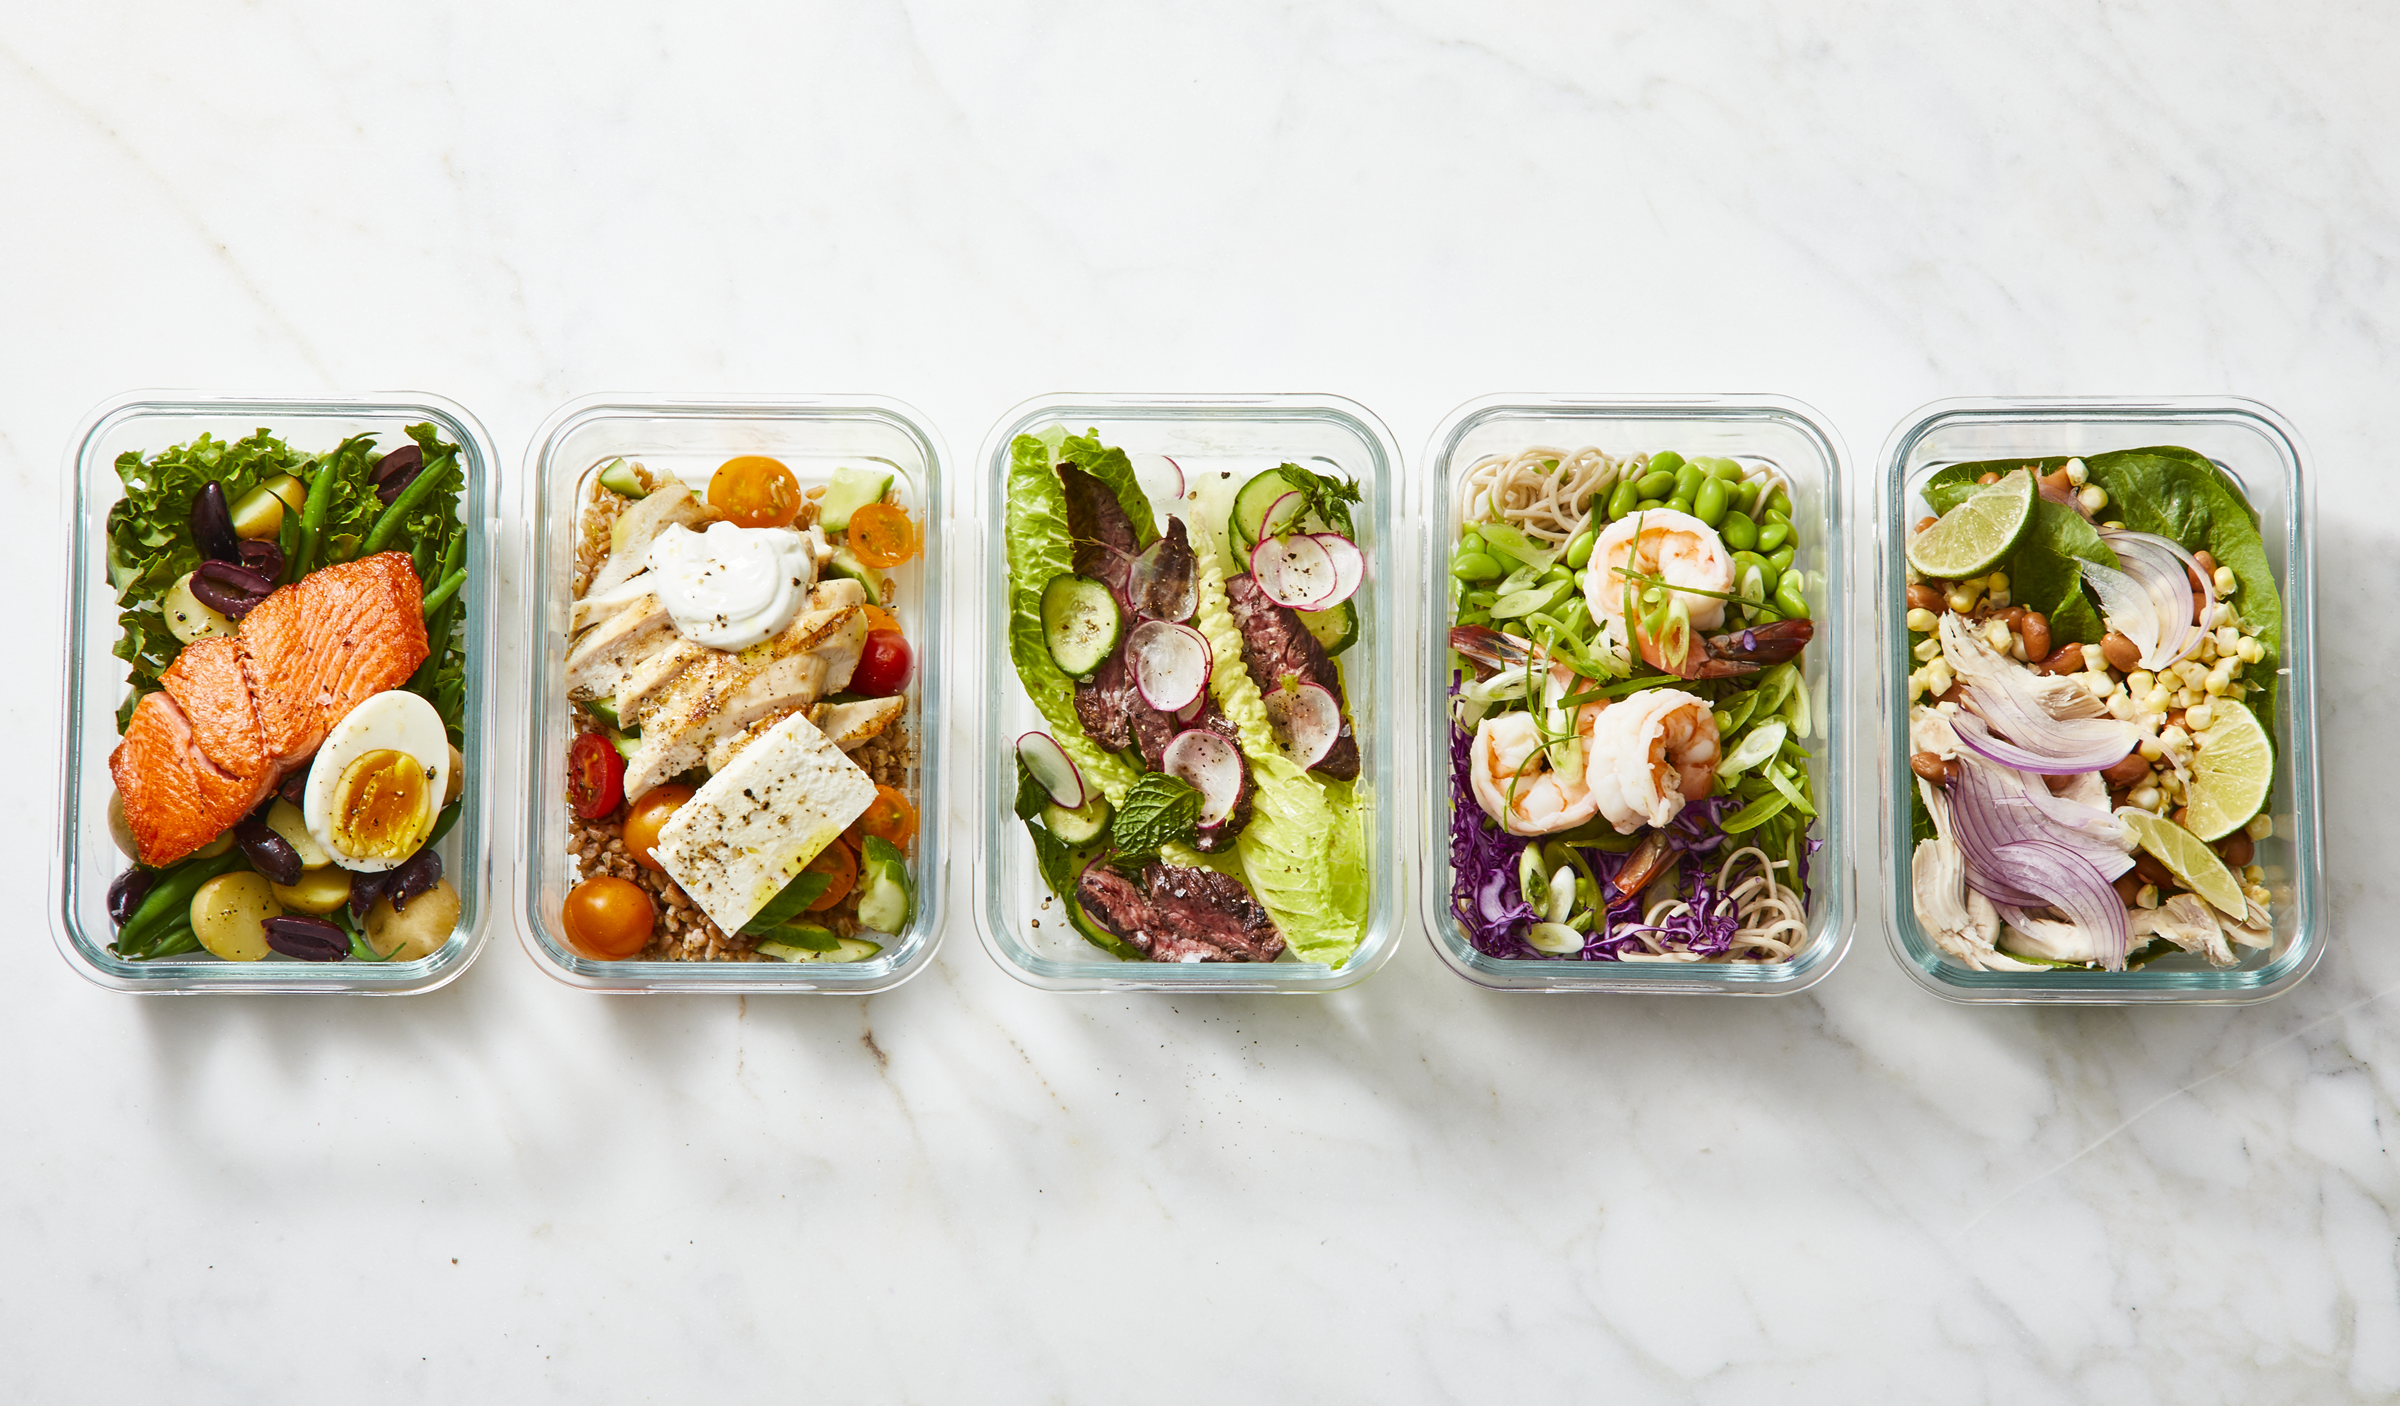 How to Meal Prep: Beginner Meal Prep Ideas, Recipes and Tips